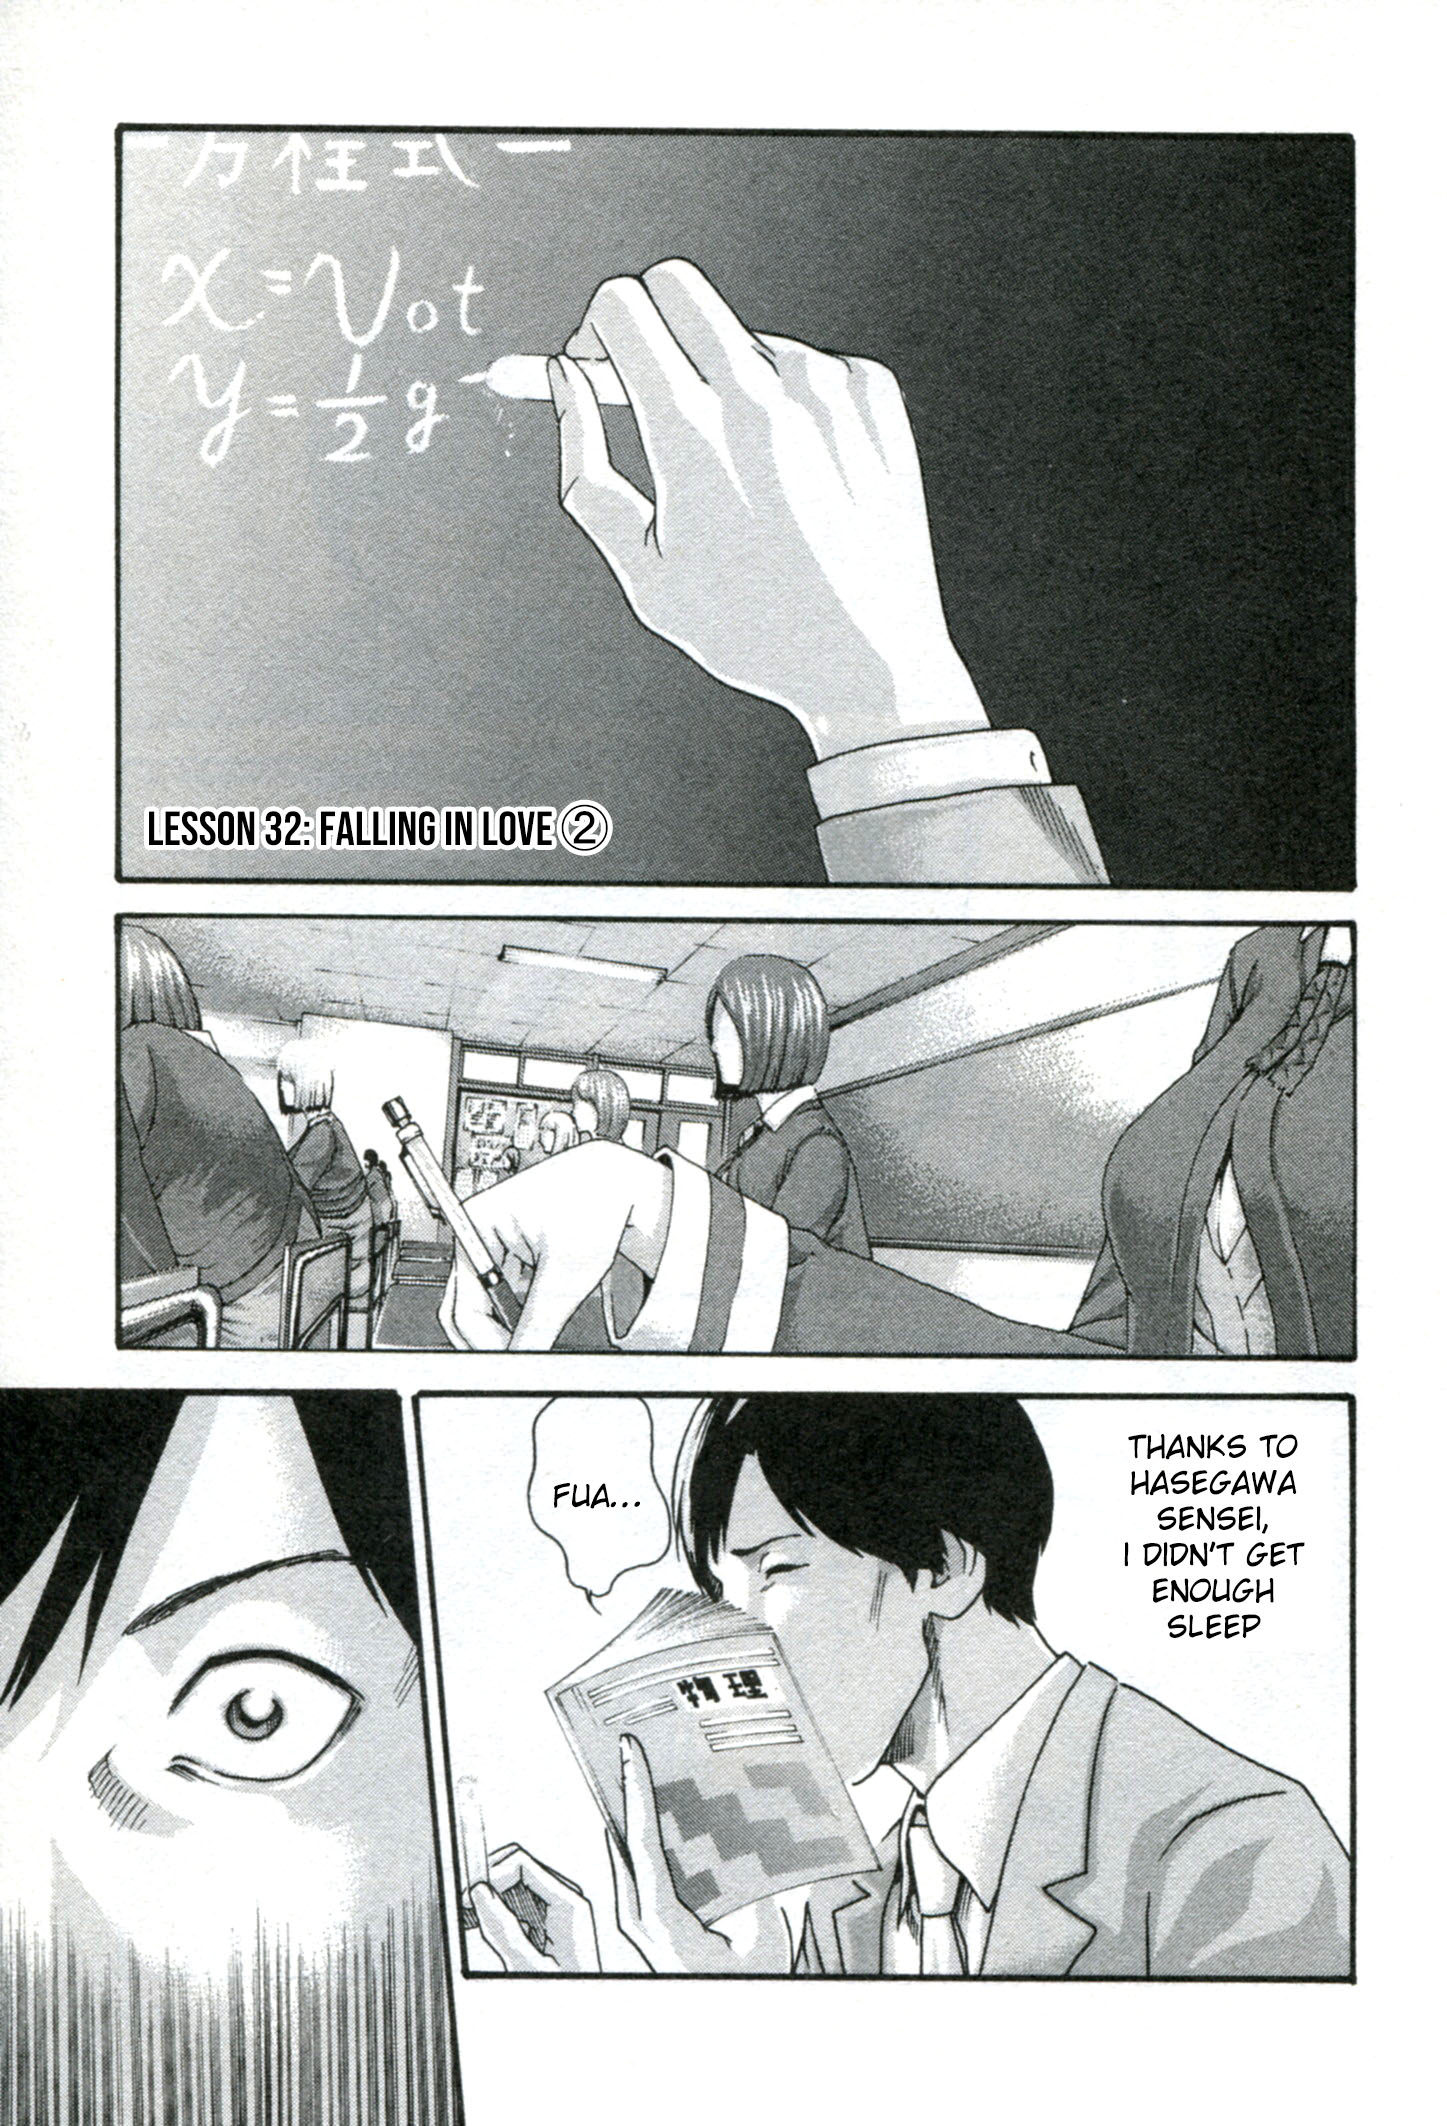 Sense Vol.4 Chapter 32: Falling In Love ② - Picture 2